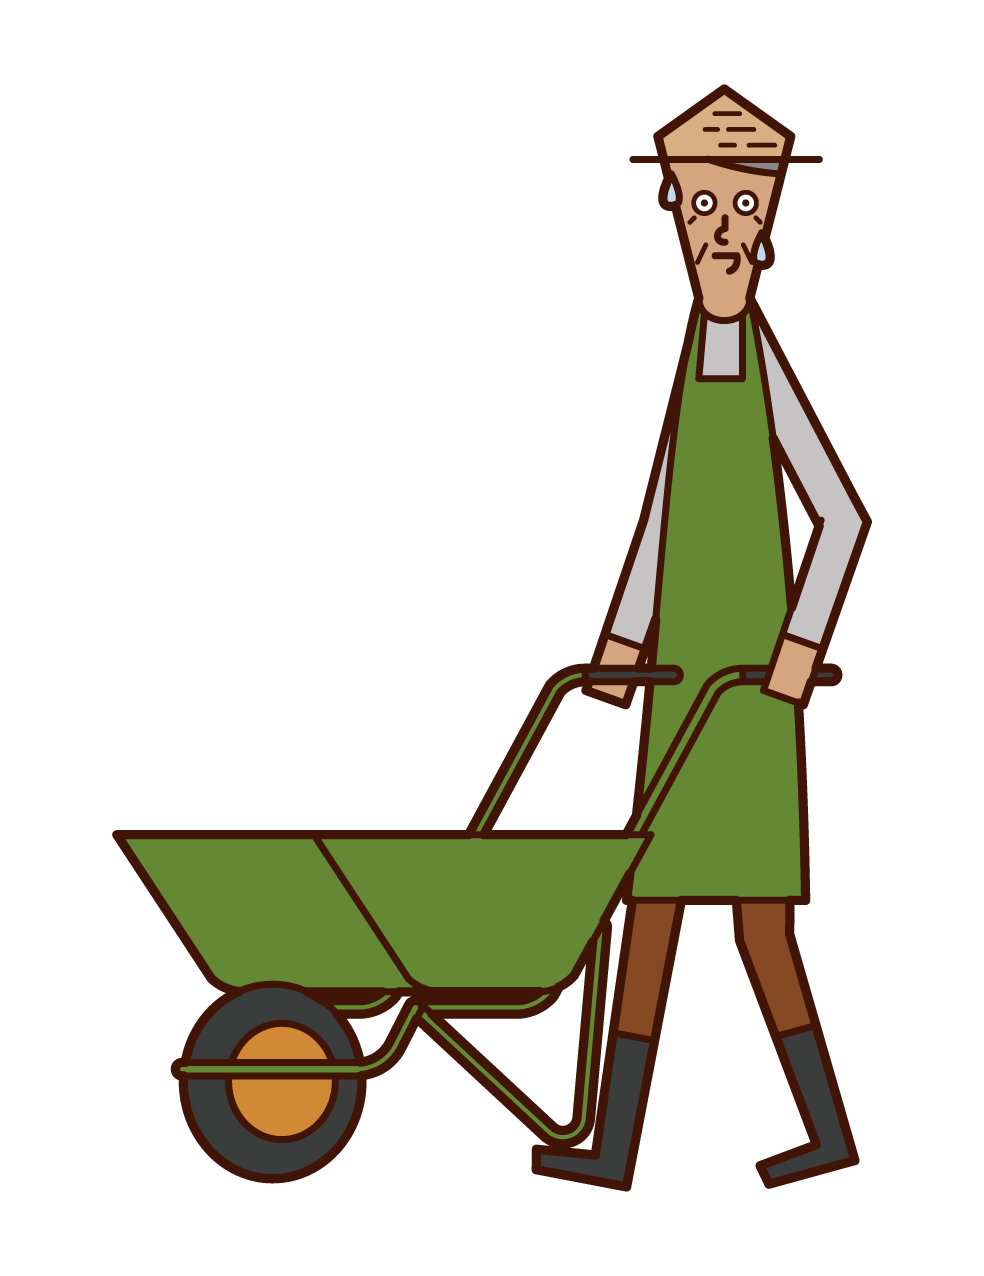 Illustration of a man (old man) using a wheeled unicycle